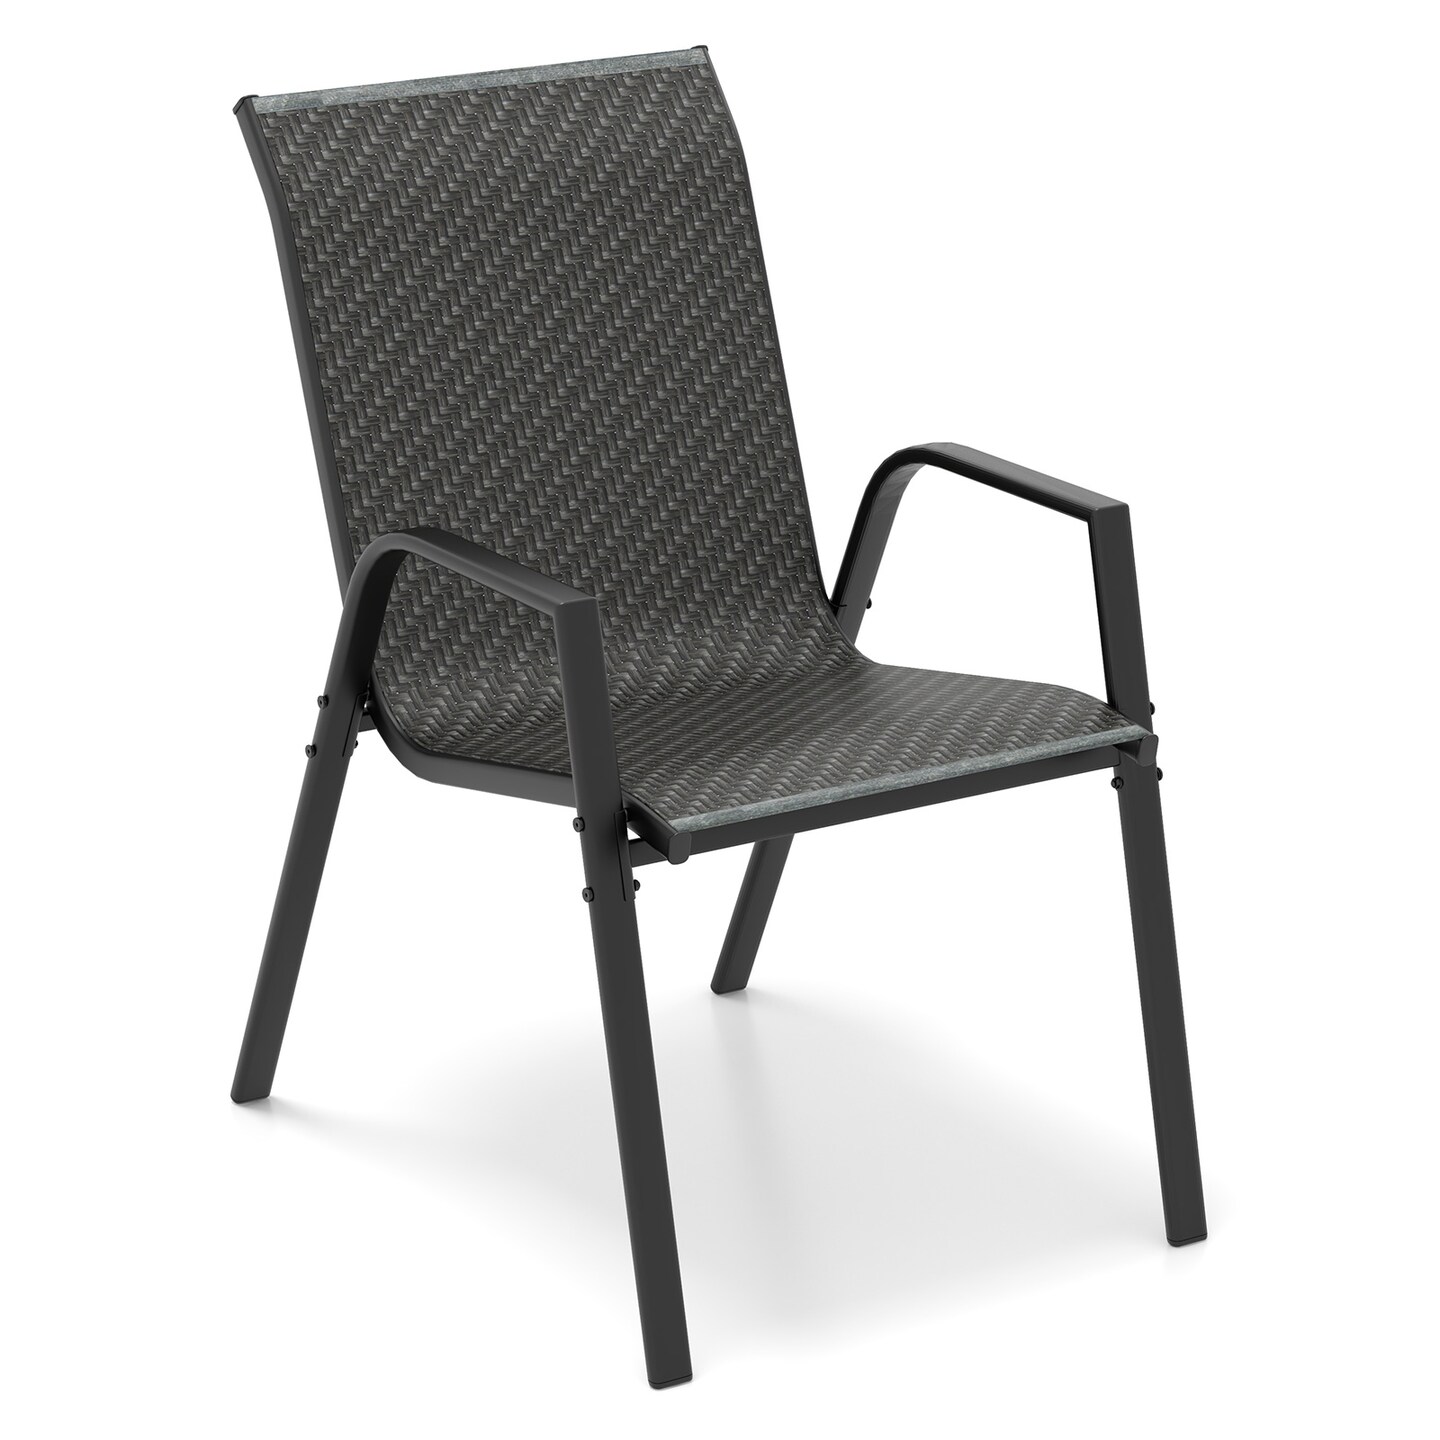 4 Piece Patio Rattan Dining Chairs With Wicker Woven Seat And Back For Backyard Front Porch